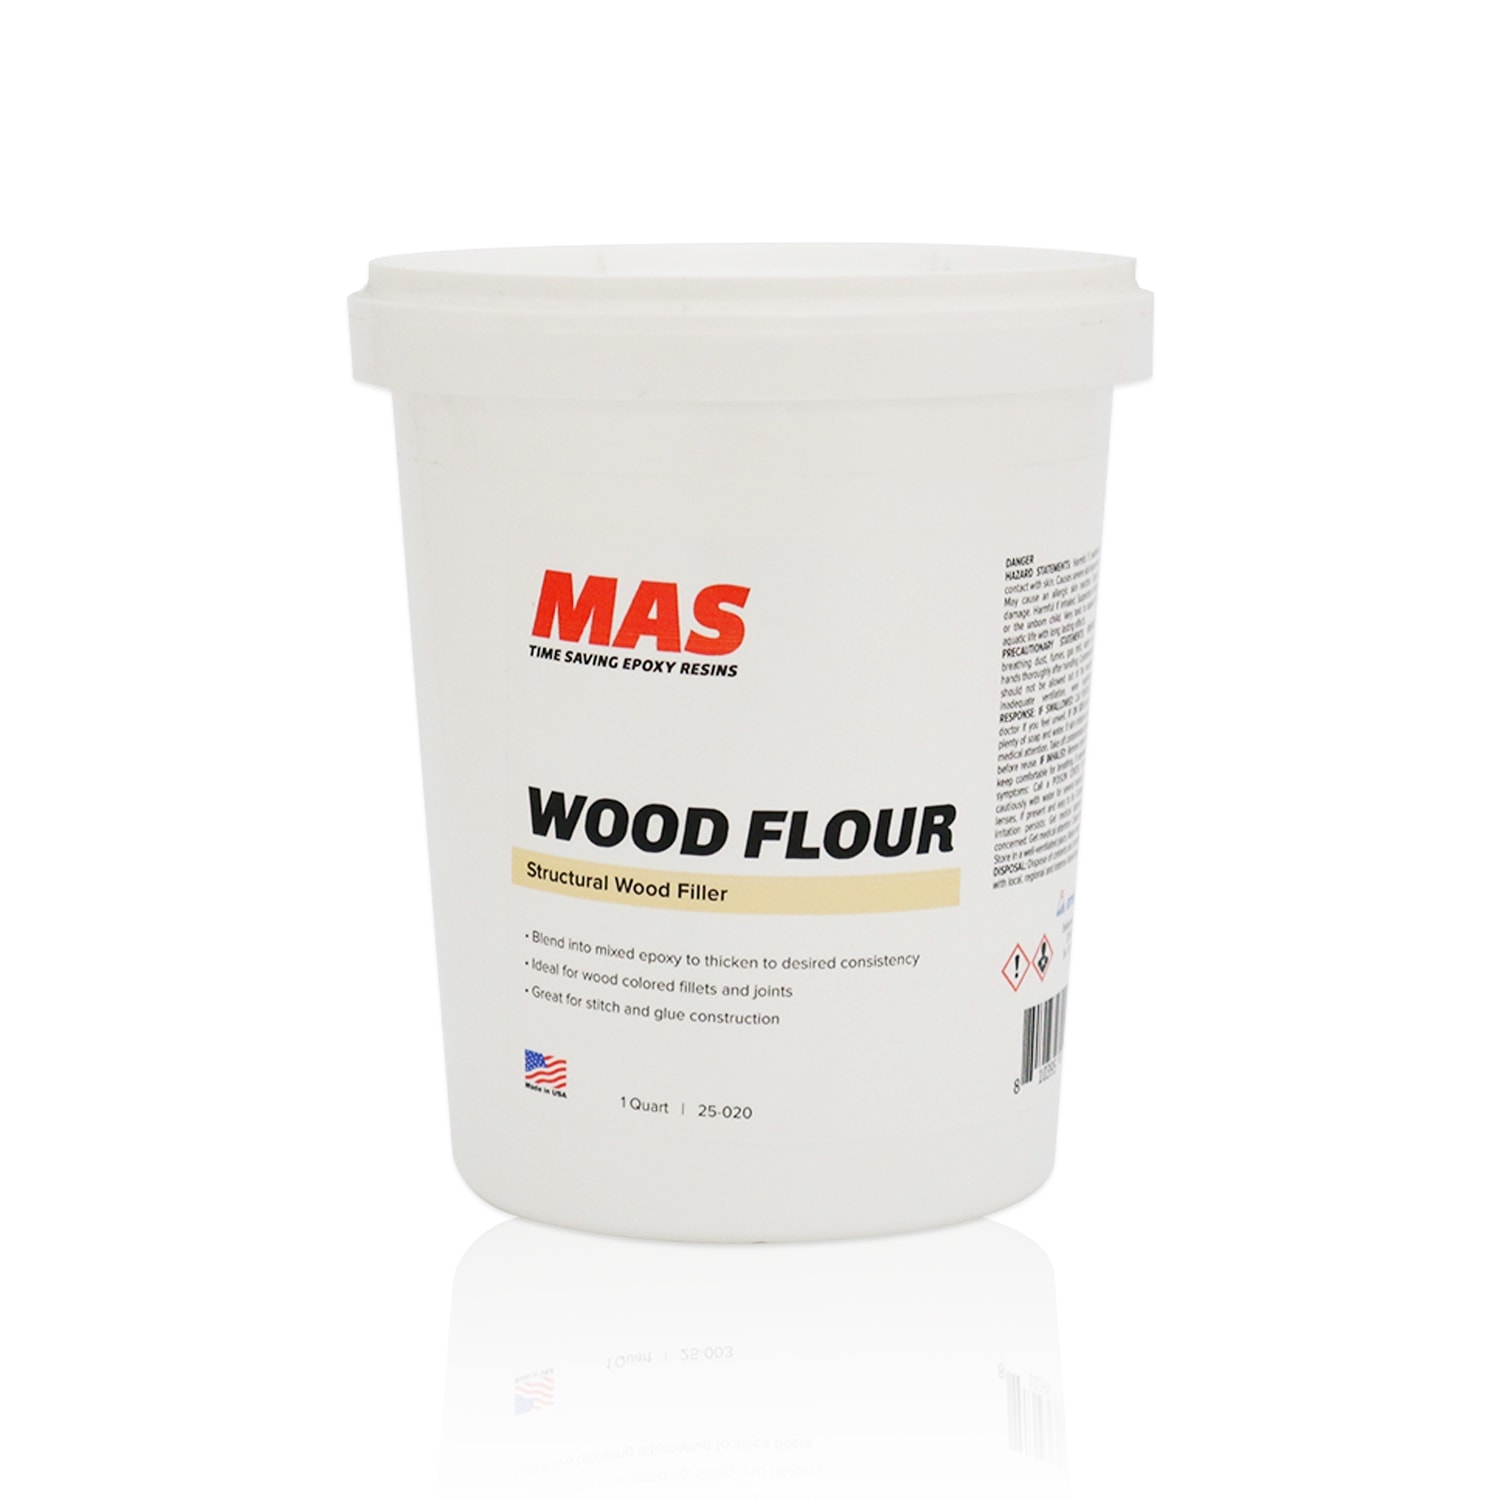 Wood Flour Questions & Answers